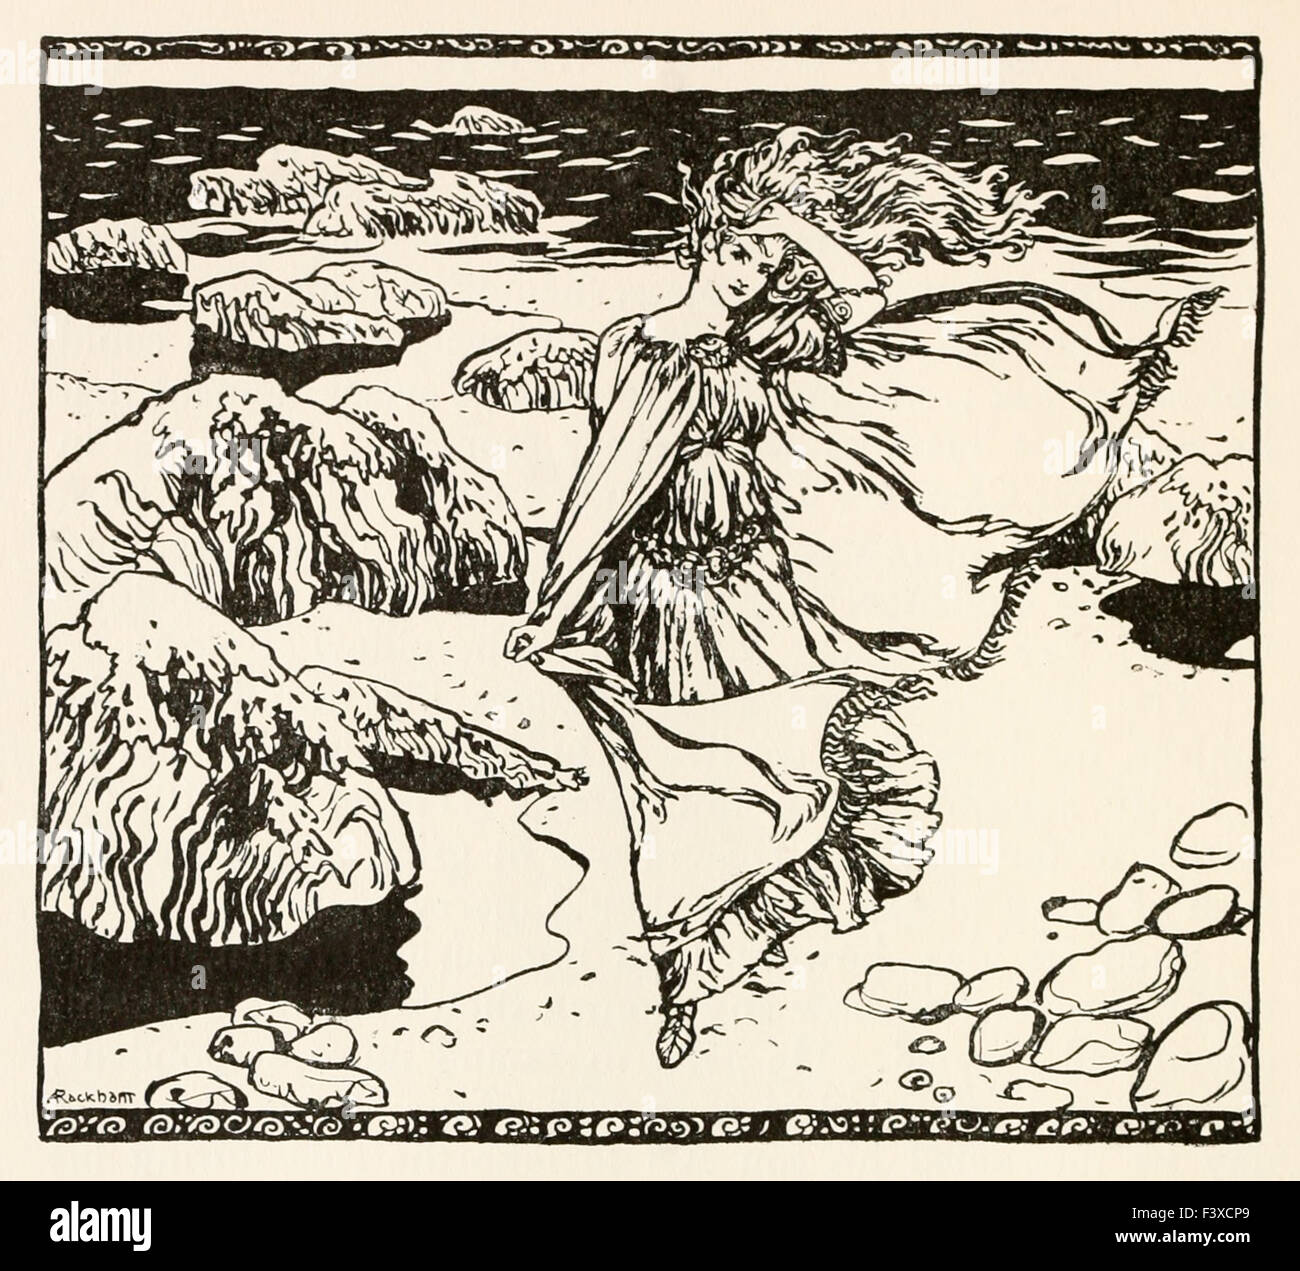 Becuma from 'Becuma of the White Skin' in 'Irish Fairy Tales', illustration by Arthur Rackham (1867-1939). See description for more information. Stock Photo